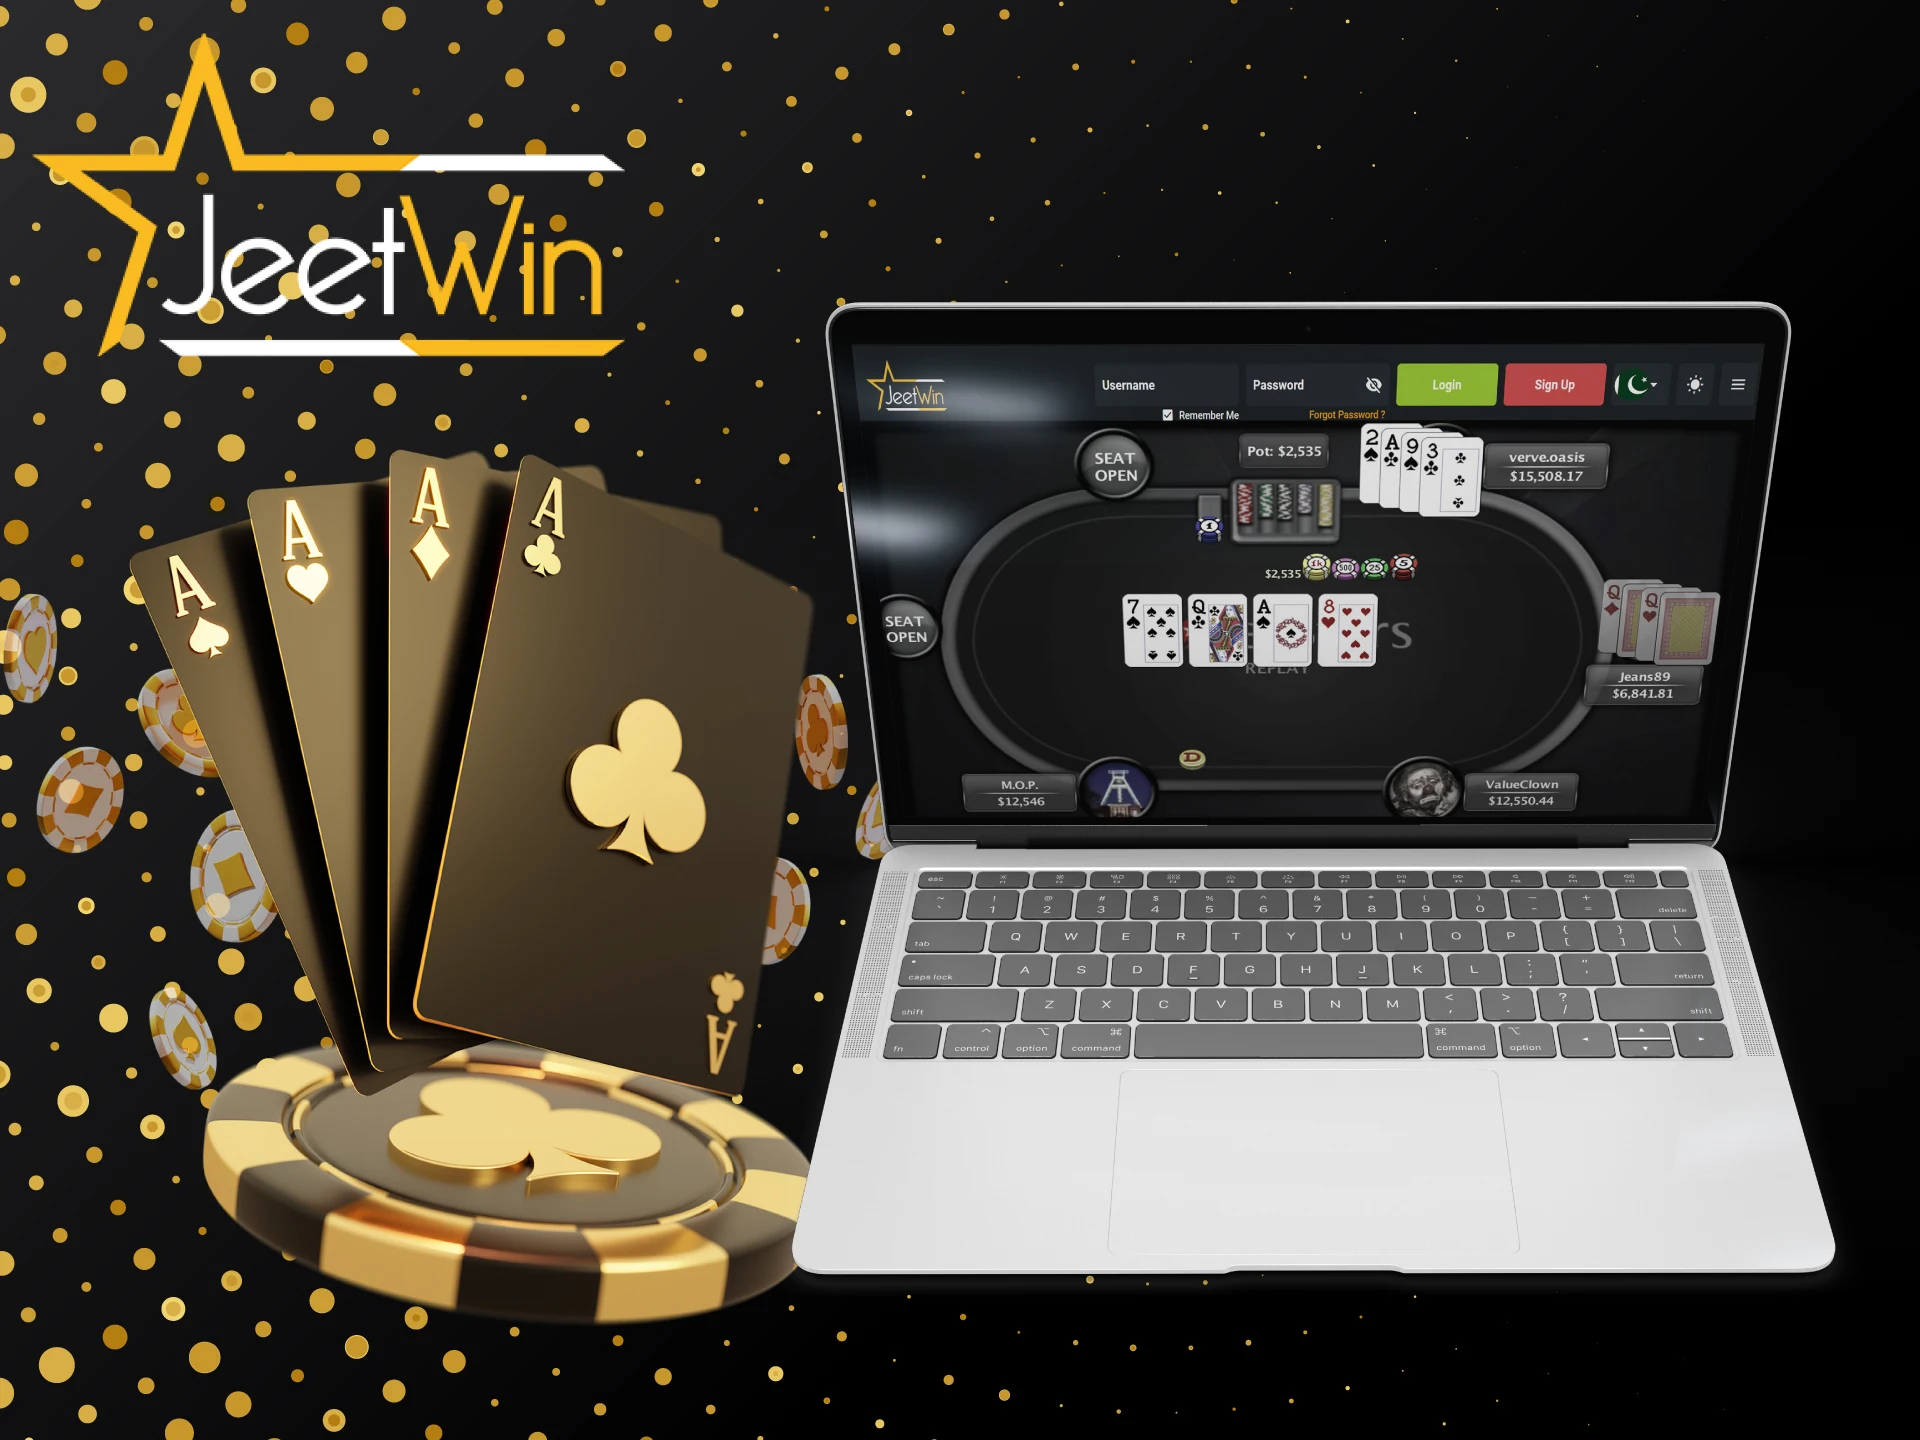 Sign up at JeetWin and collect winning combinations in Omaha Poker.